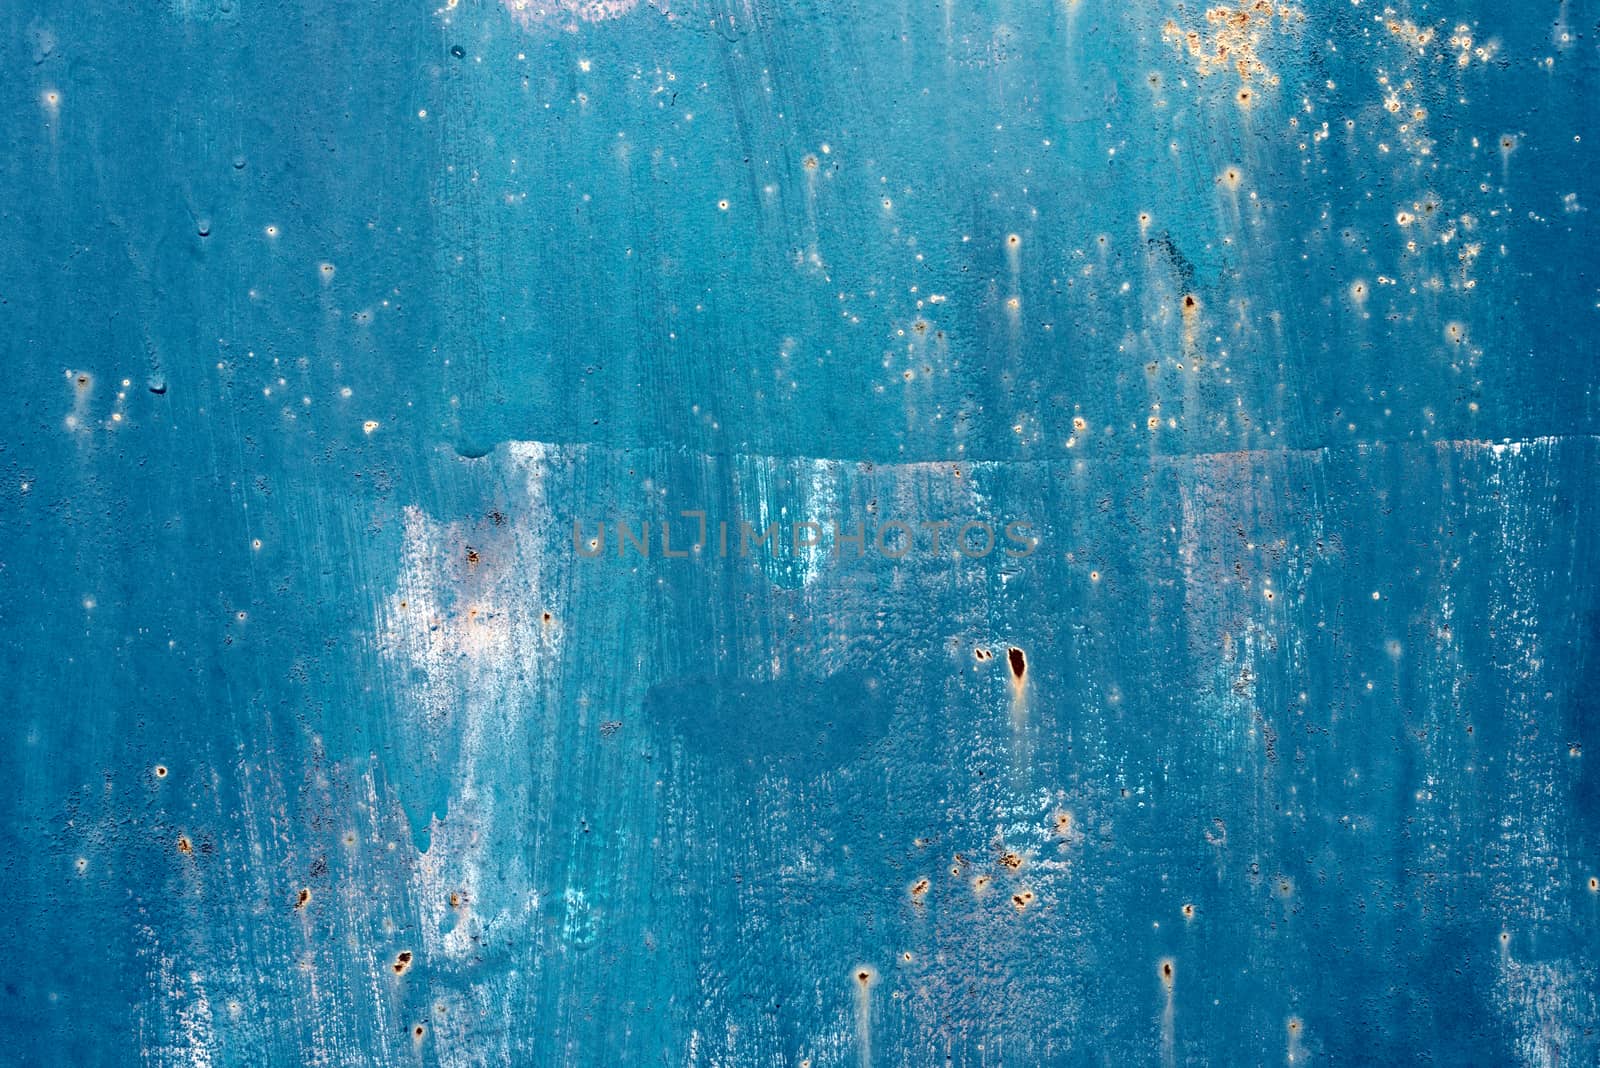 Cracked painted old metal texture. Turquoise color. Rusted surface